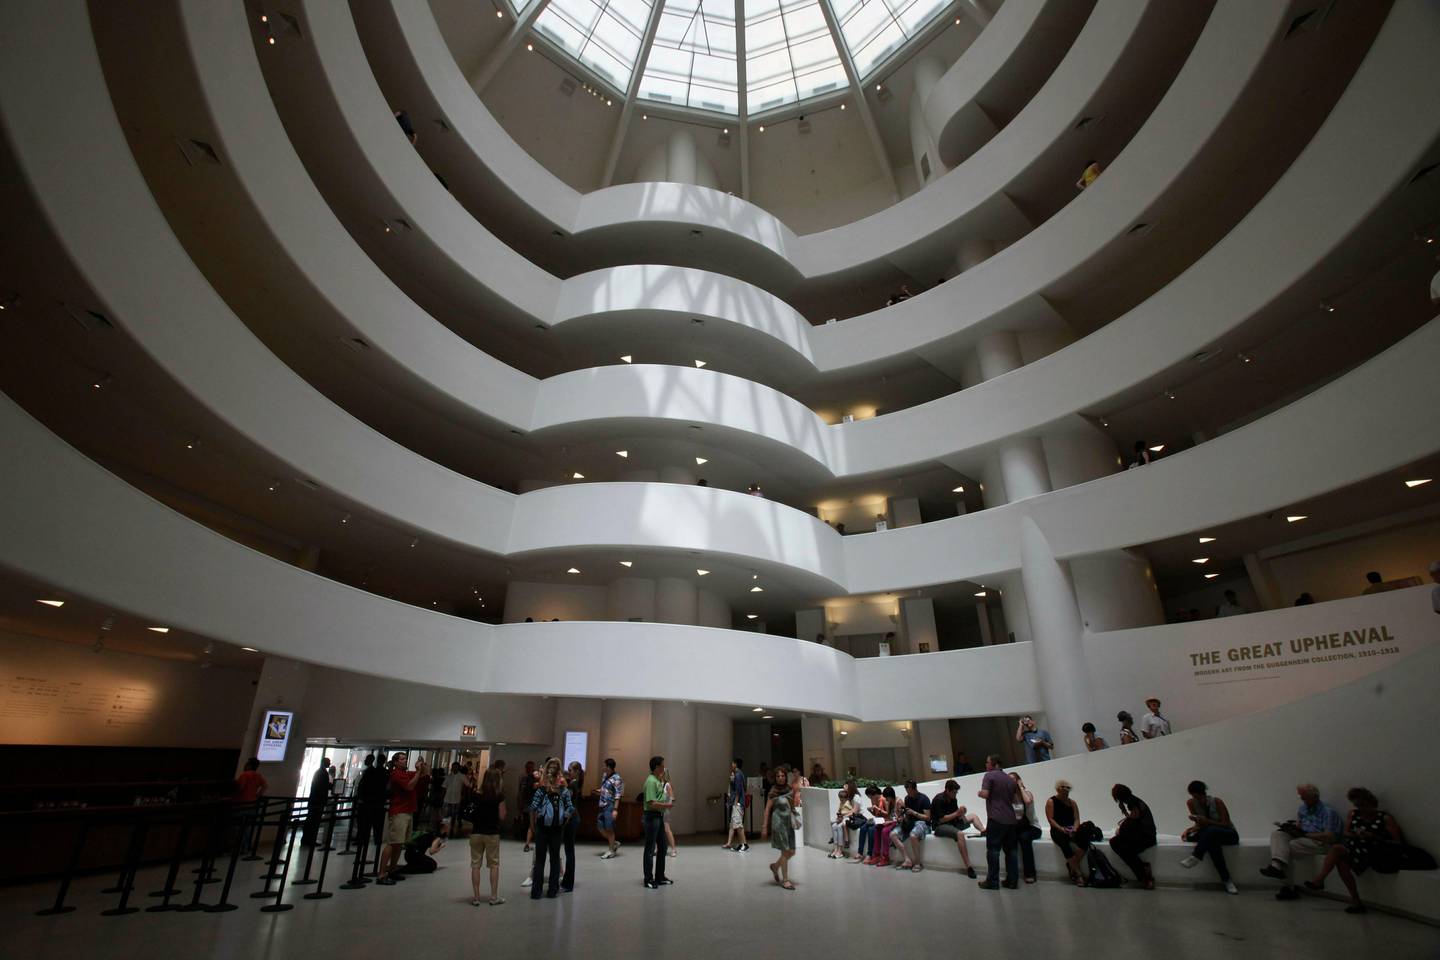 FILE - This May 31, 2011, file photo, shows the interior of the Solomon R. Guggenheim Museum, architect Frank Lloyd Wright and built from 1956-1959, in New York. Eight buildings, including the Guggenheim, designed by the architect during the first half of the 20th century, where honored as World Heritage sites by United Nations Educational, Scientific and Cultural Organization, or UNESCO, on Sunday, July 7, 2019. (AP Photo/Kathy Willens, File)